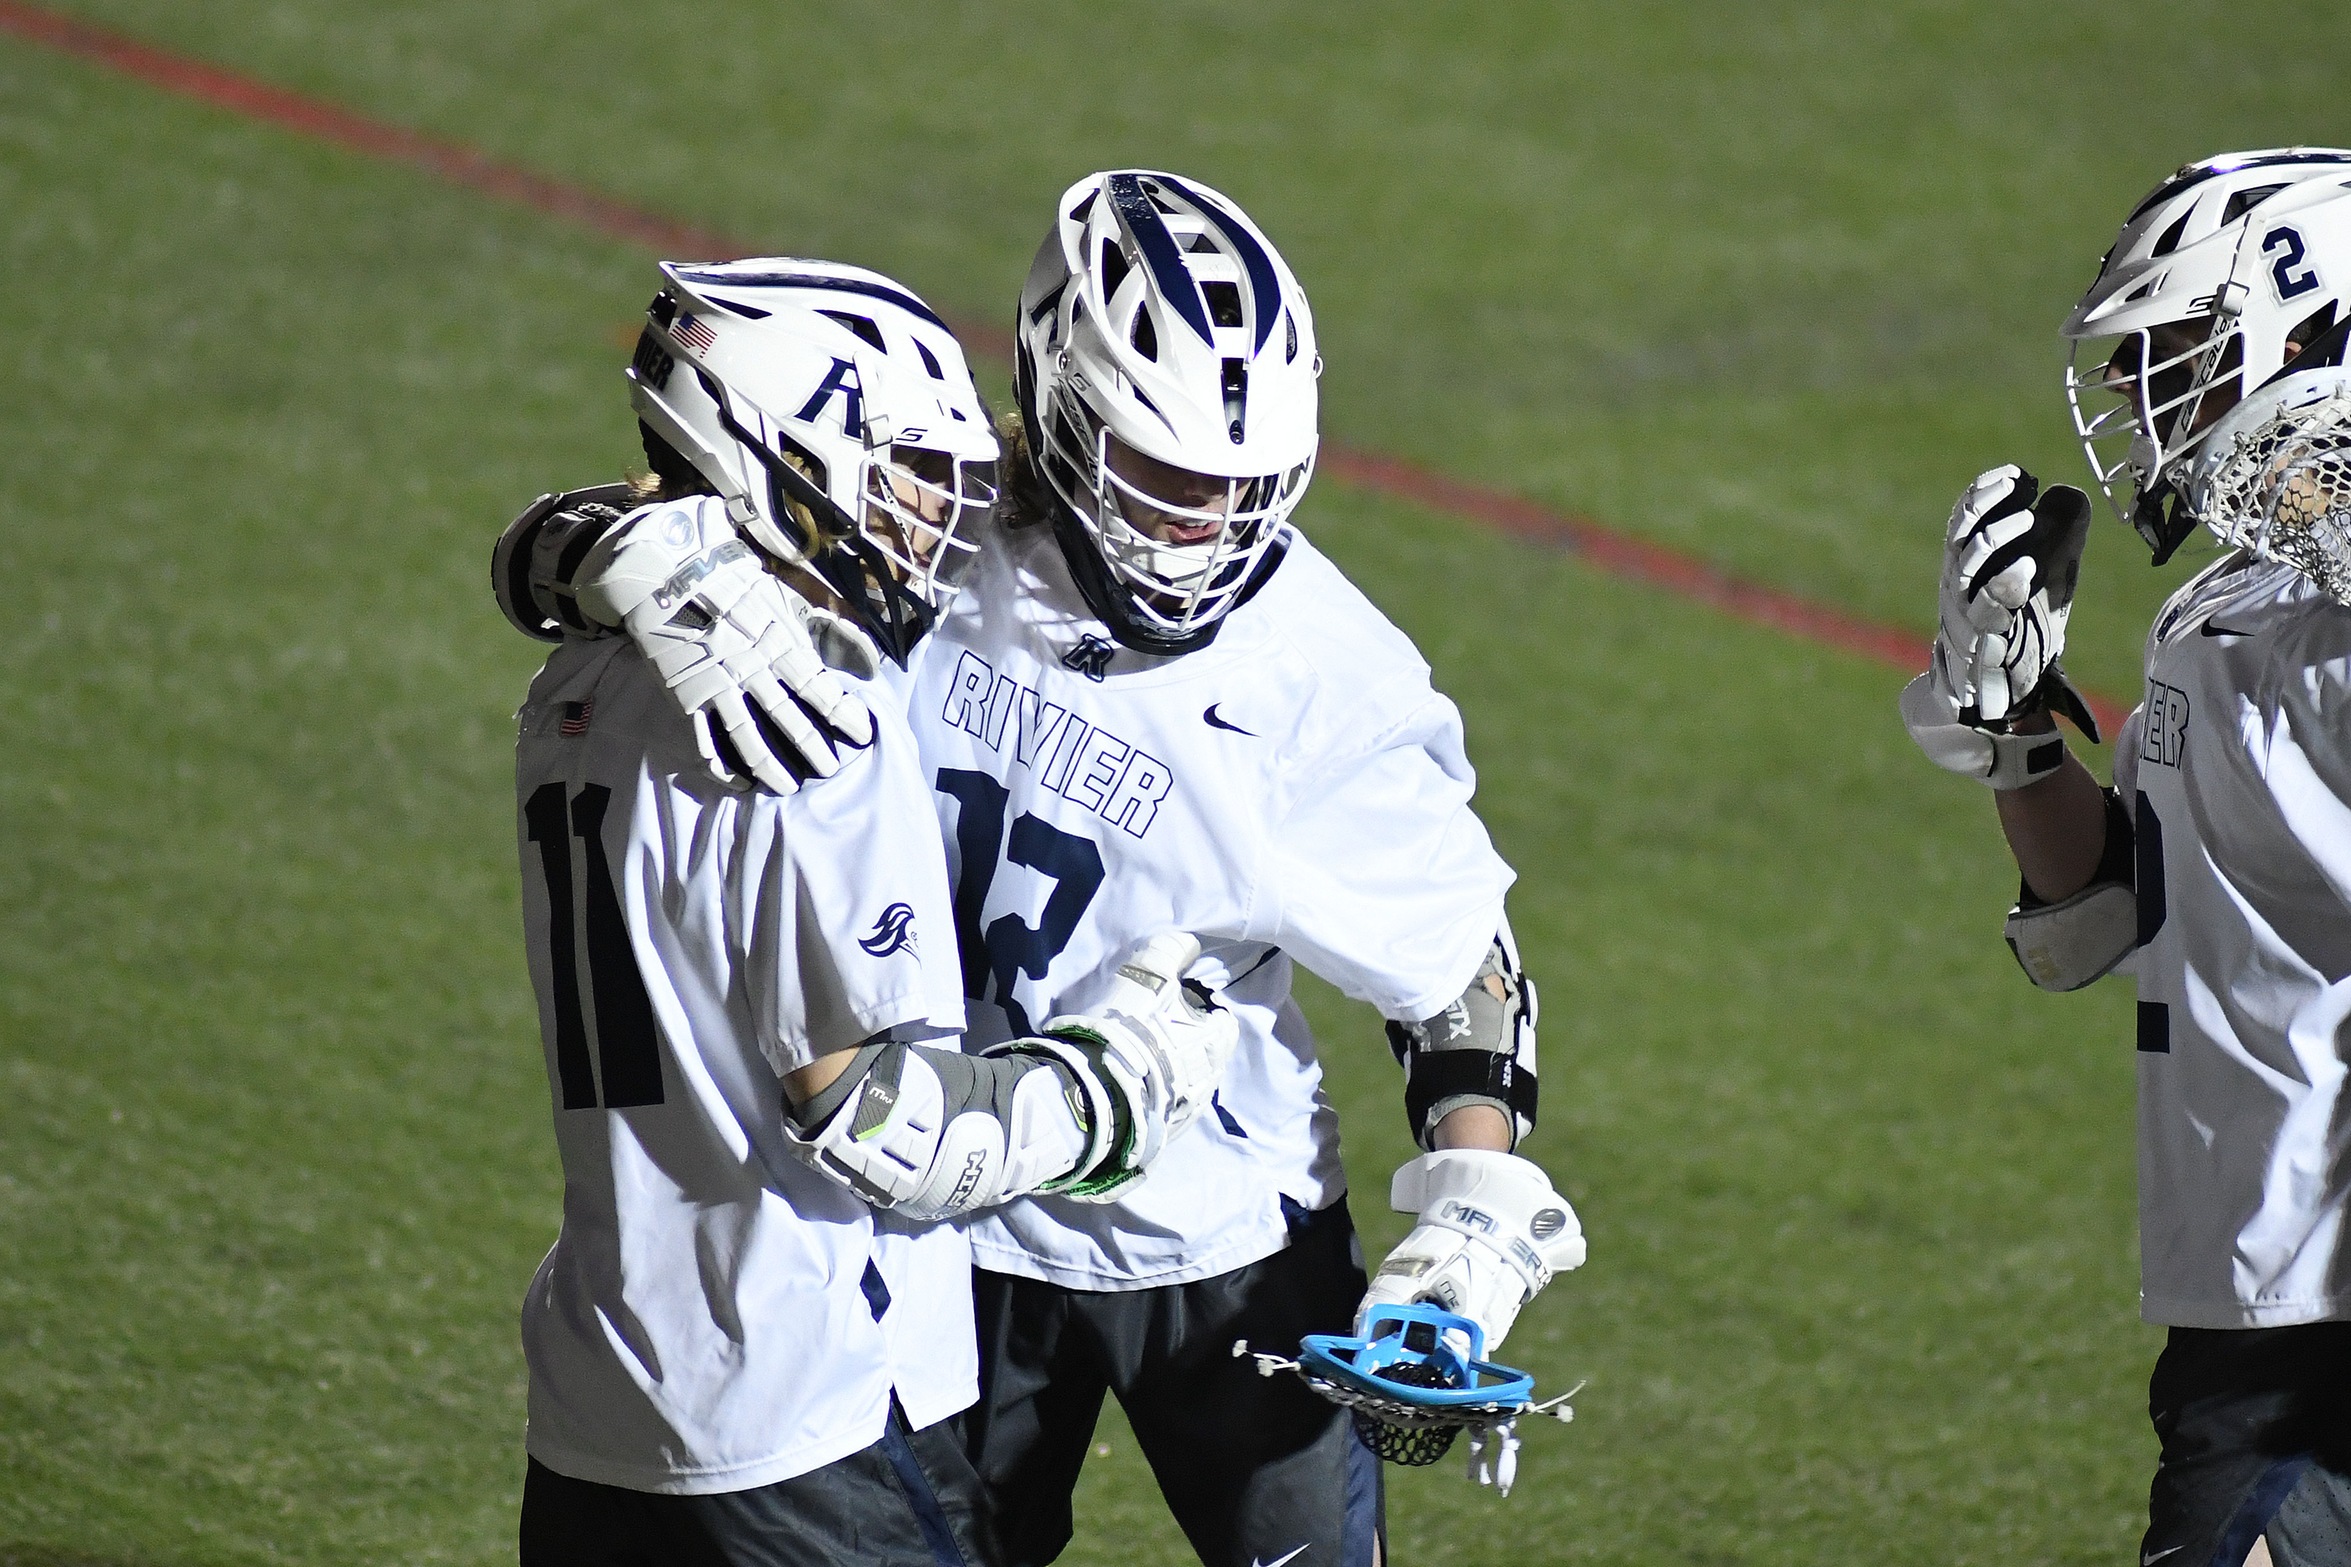 Men’s Lacrosse Scores Six in Fourth Quarter to Top Mass Maritime